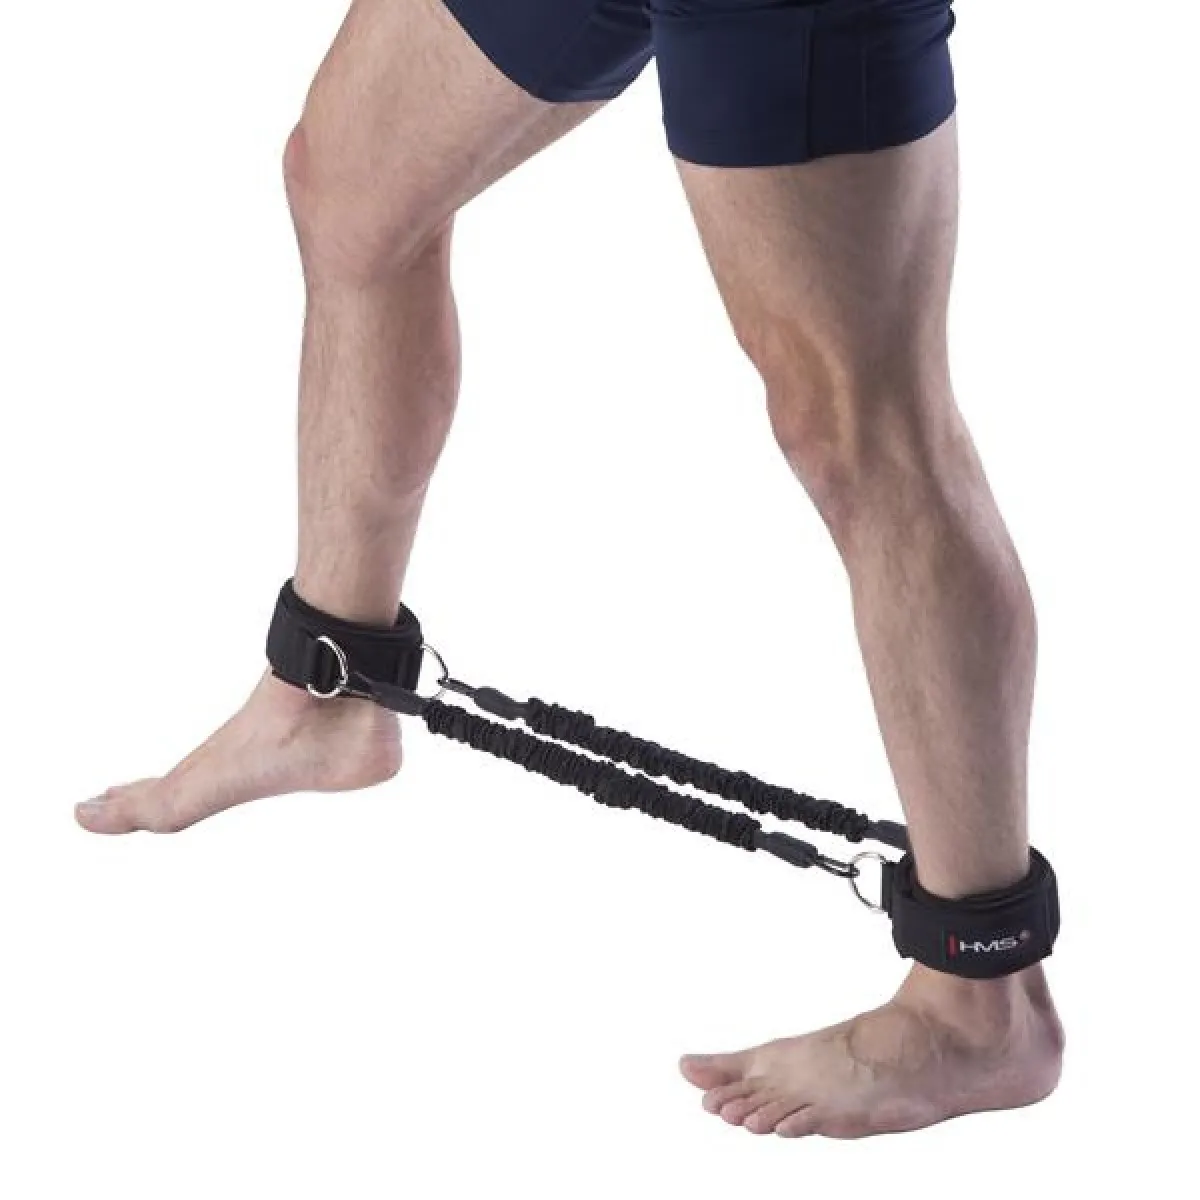 Training bands for legs